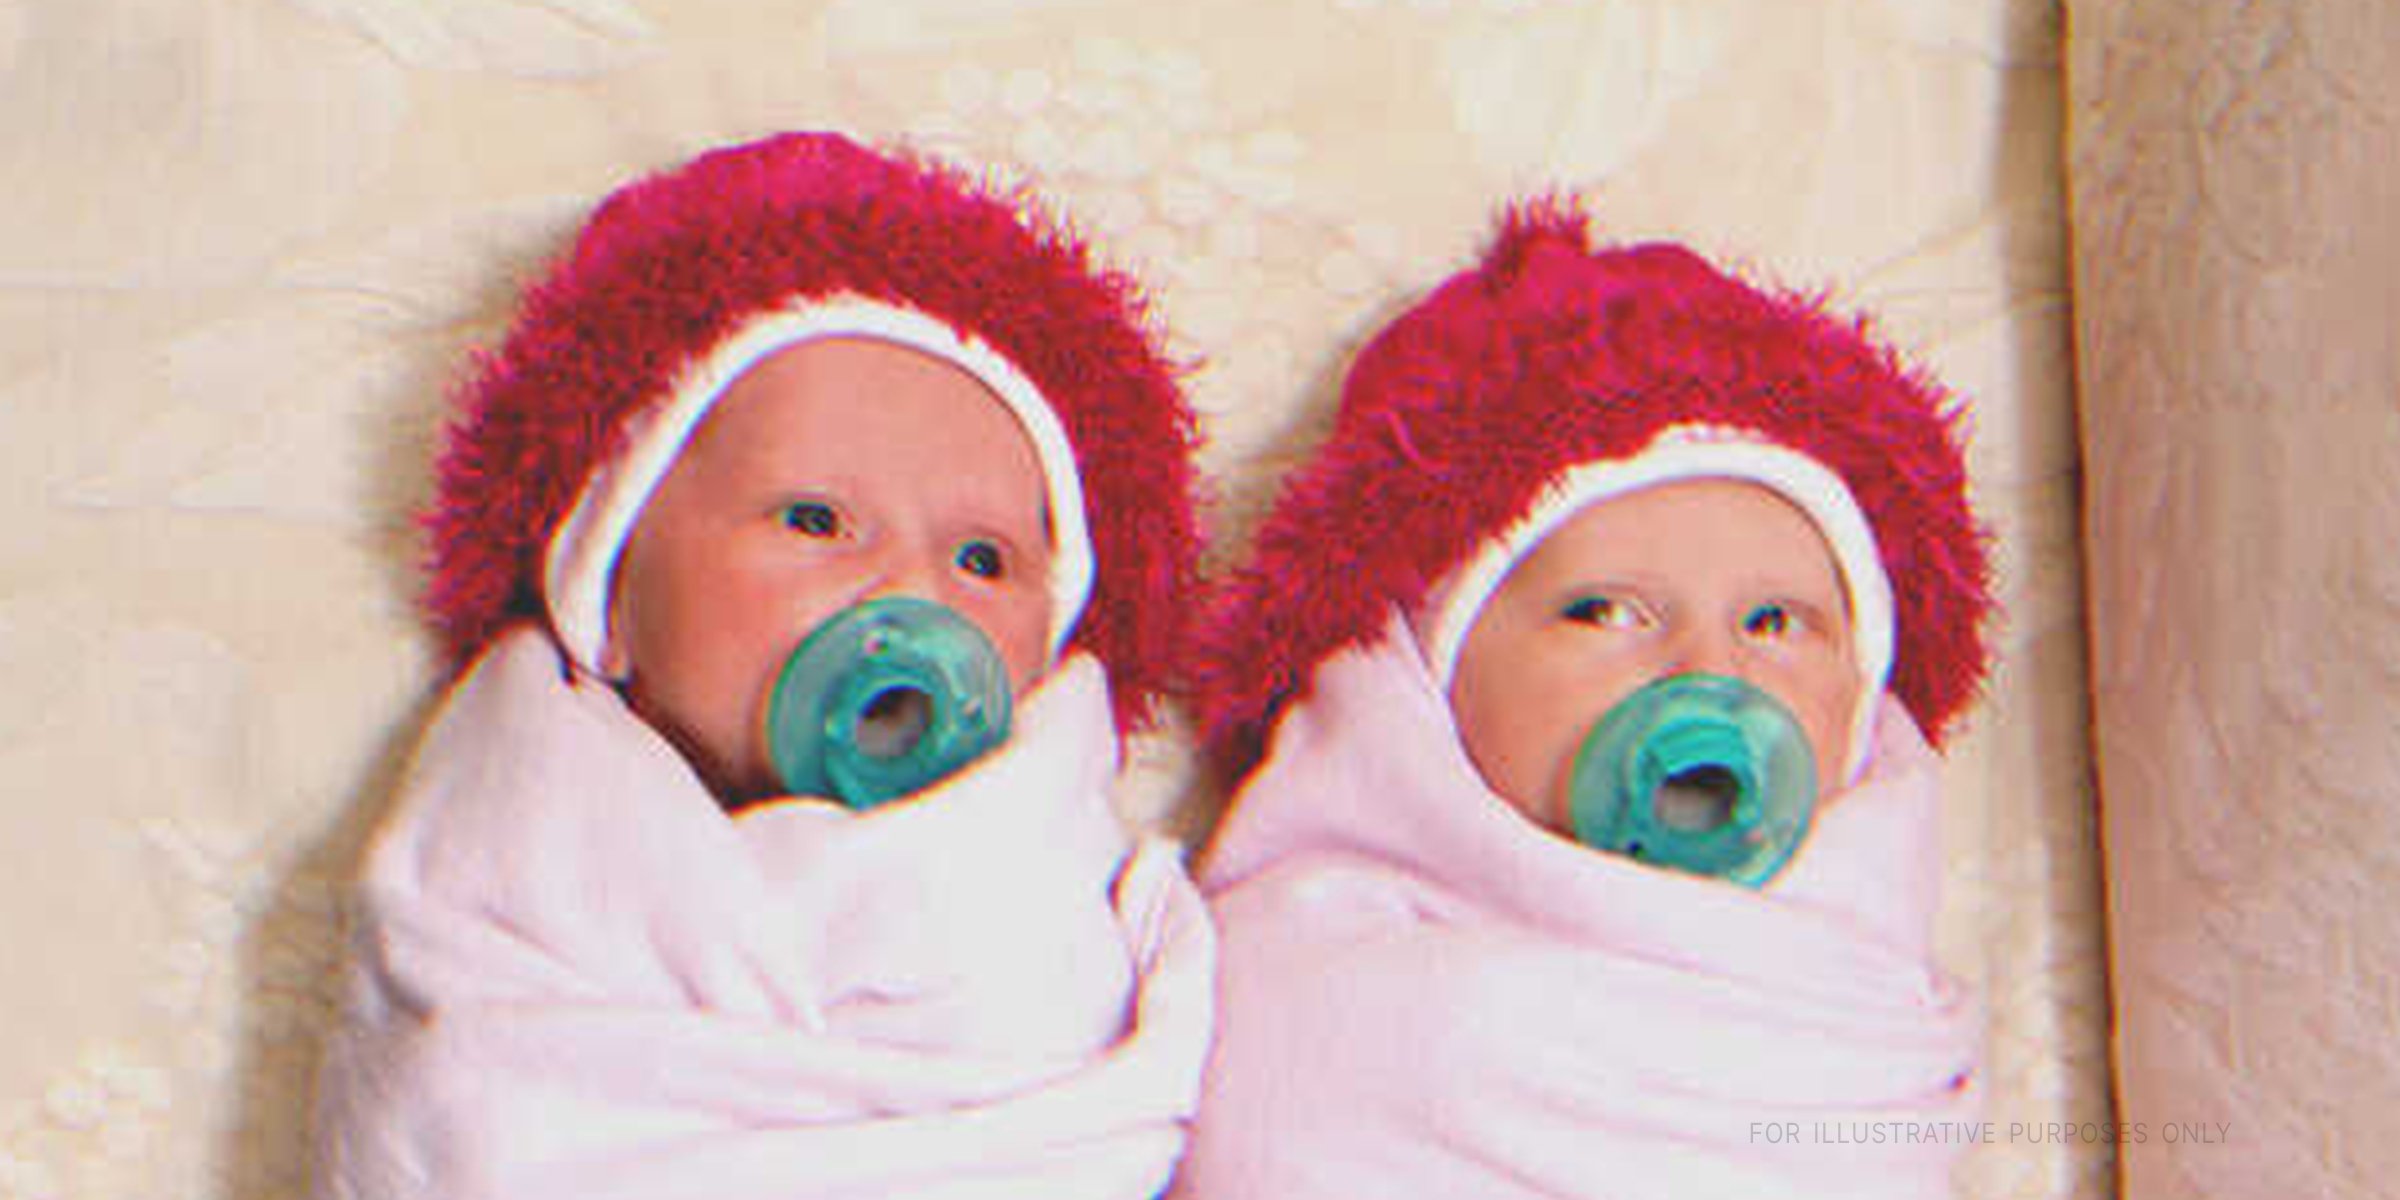 Twin babies | Source: Getty Images